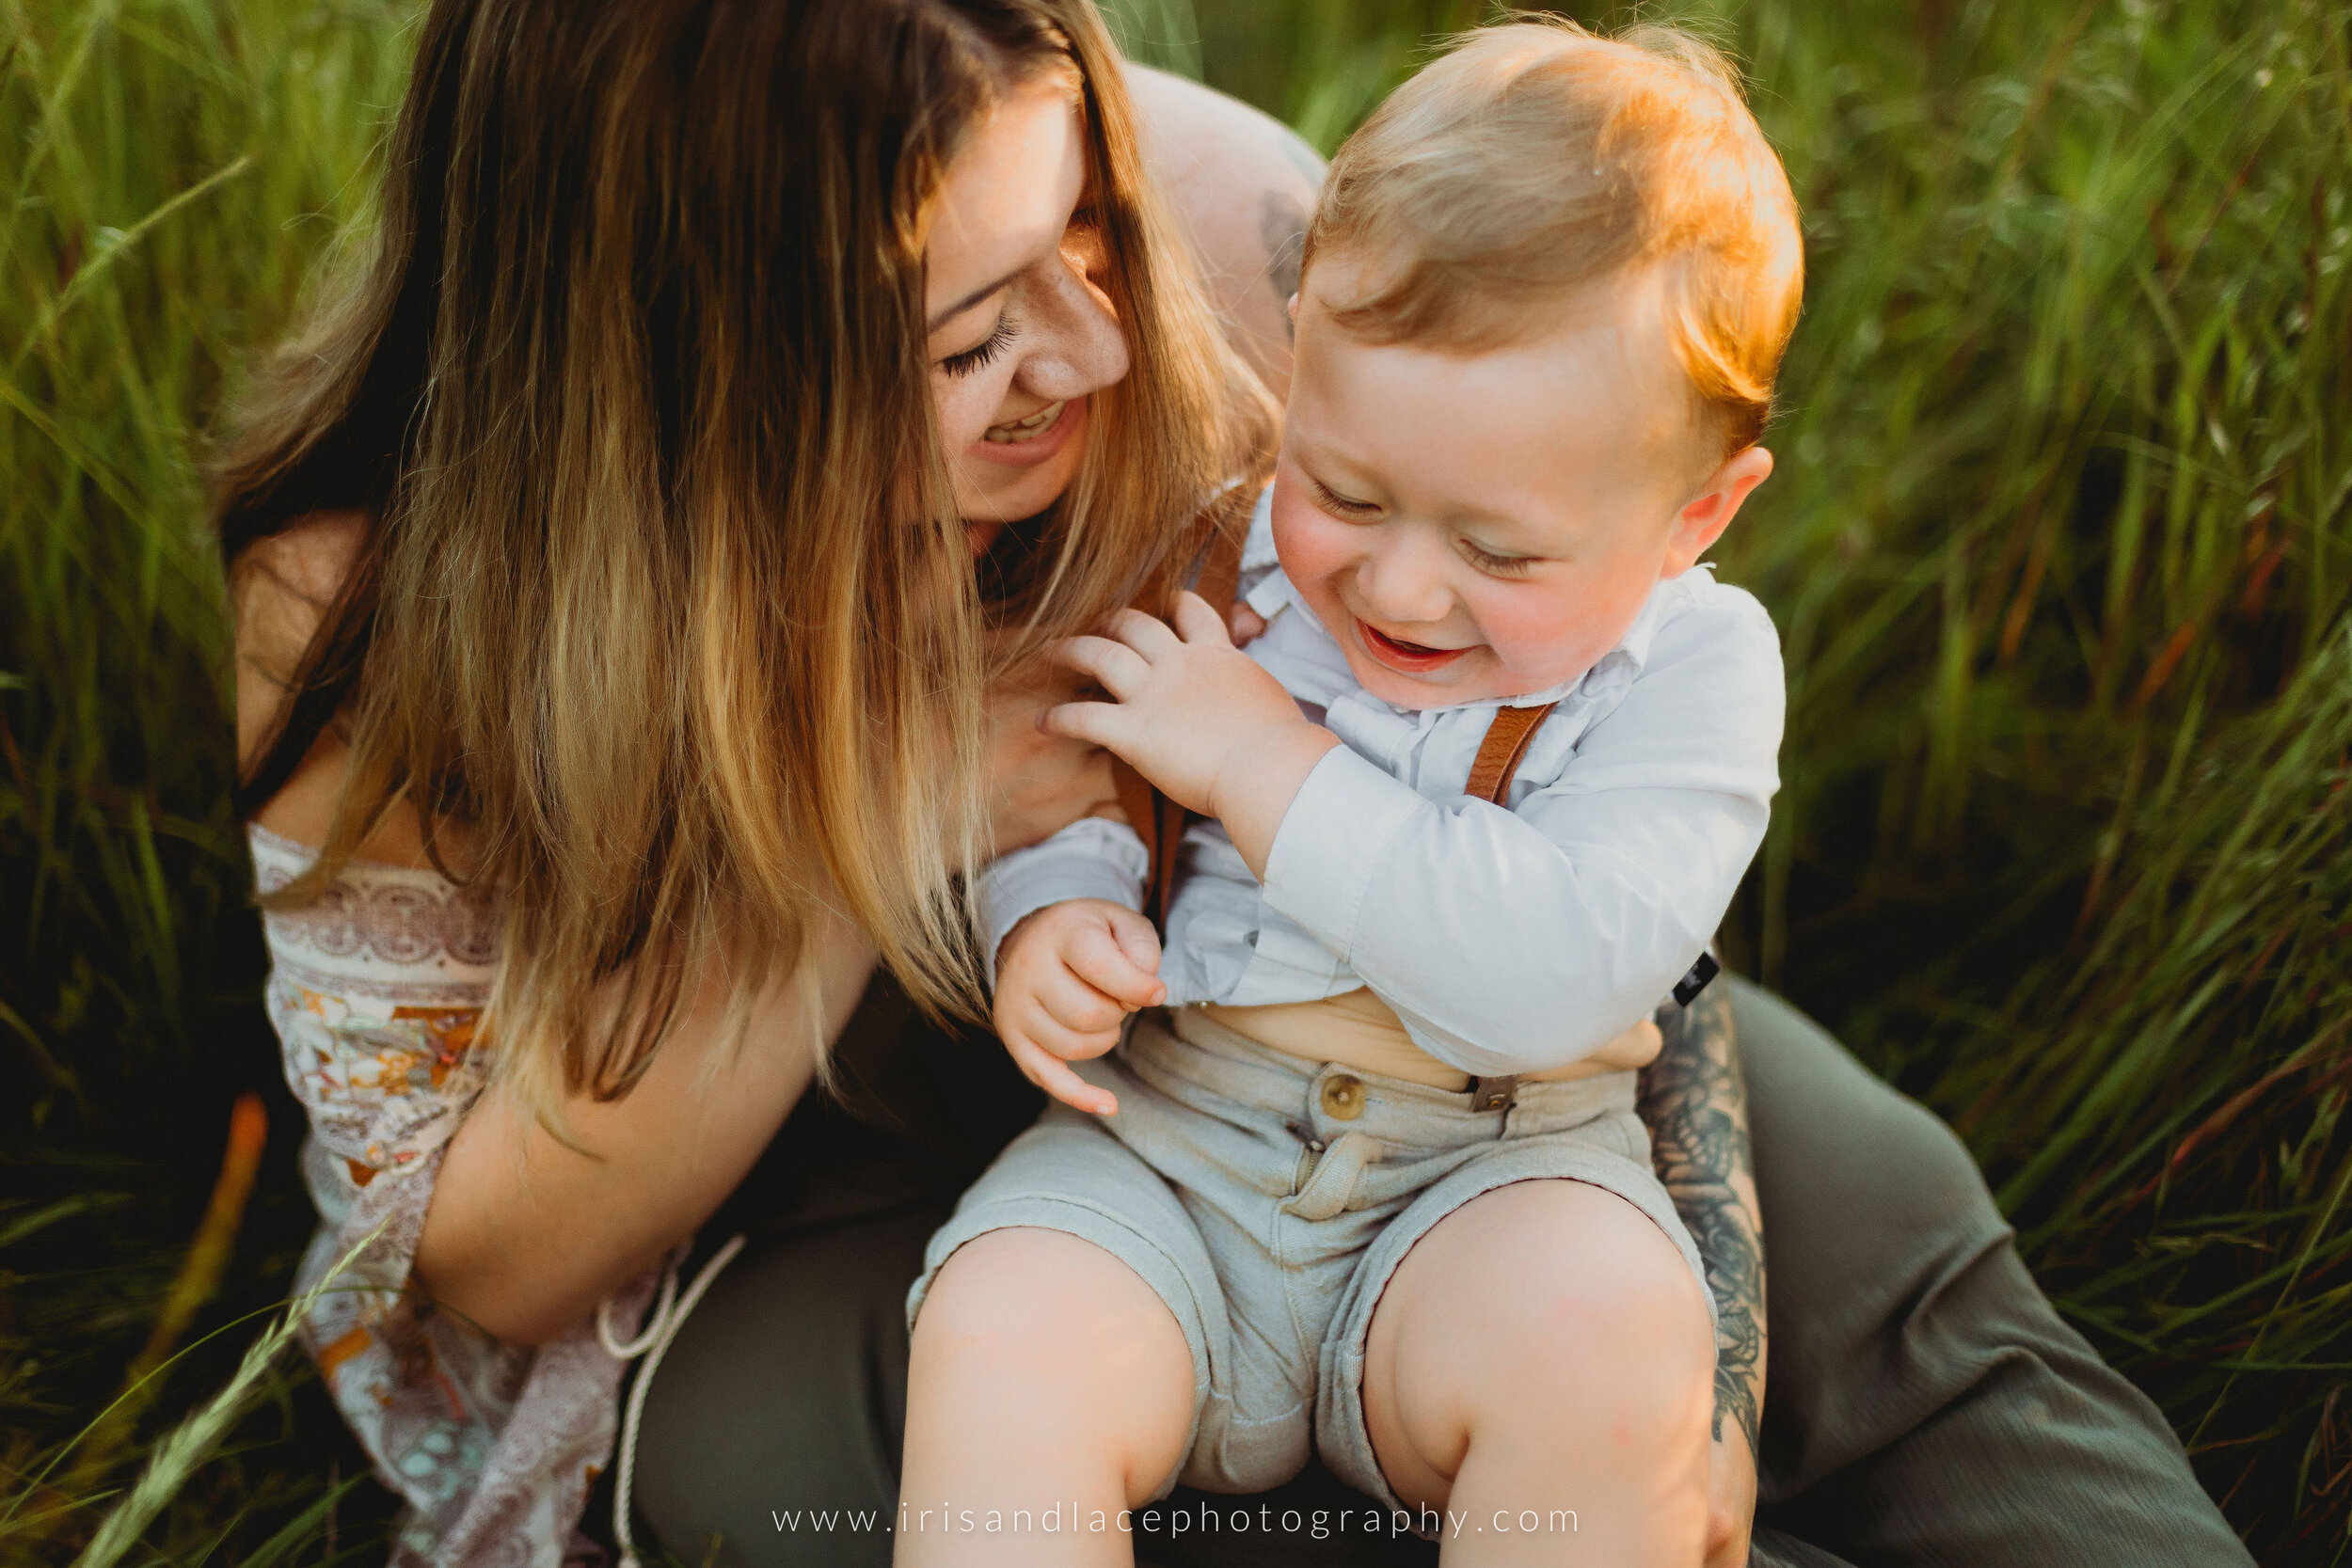 Mountain View, CA Family Photographer | Iris and Lace Photography